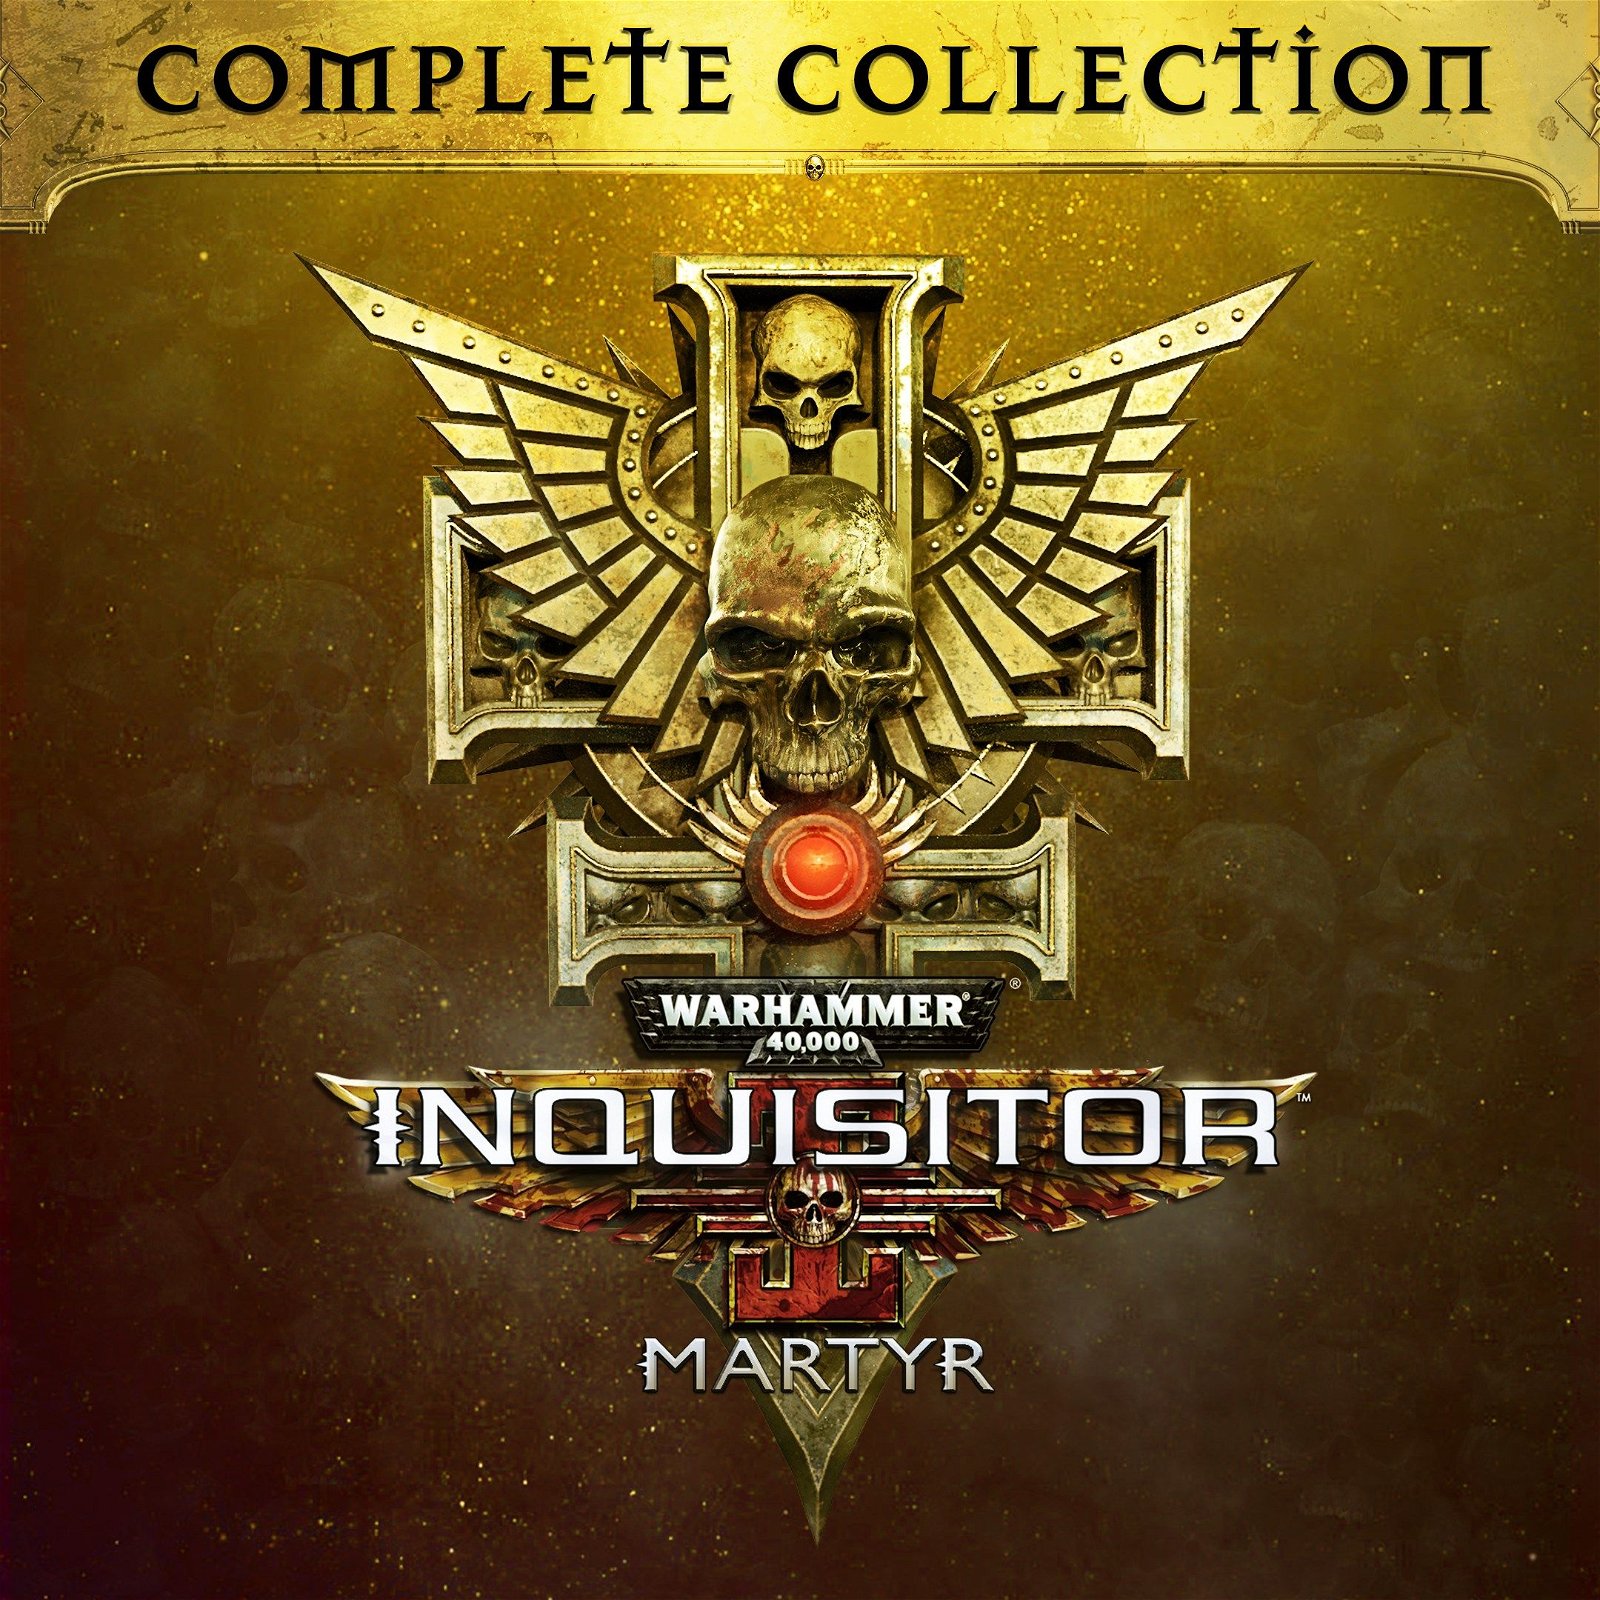 Image of Warhammer 40,000: Inquisitor - Martyr Complete Collection